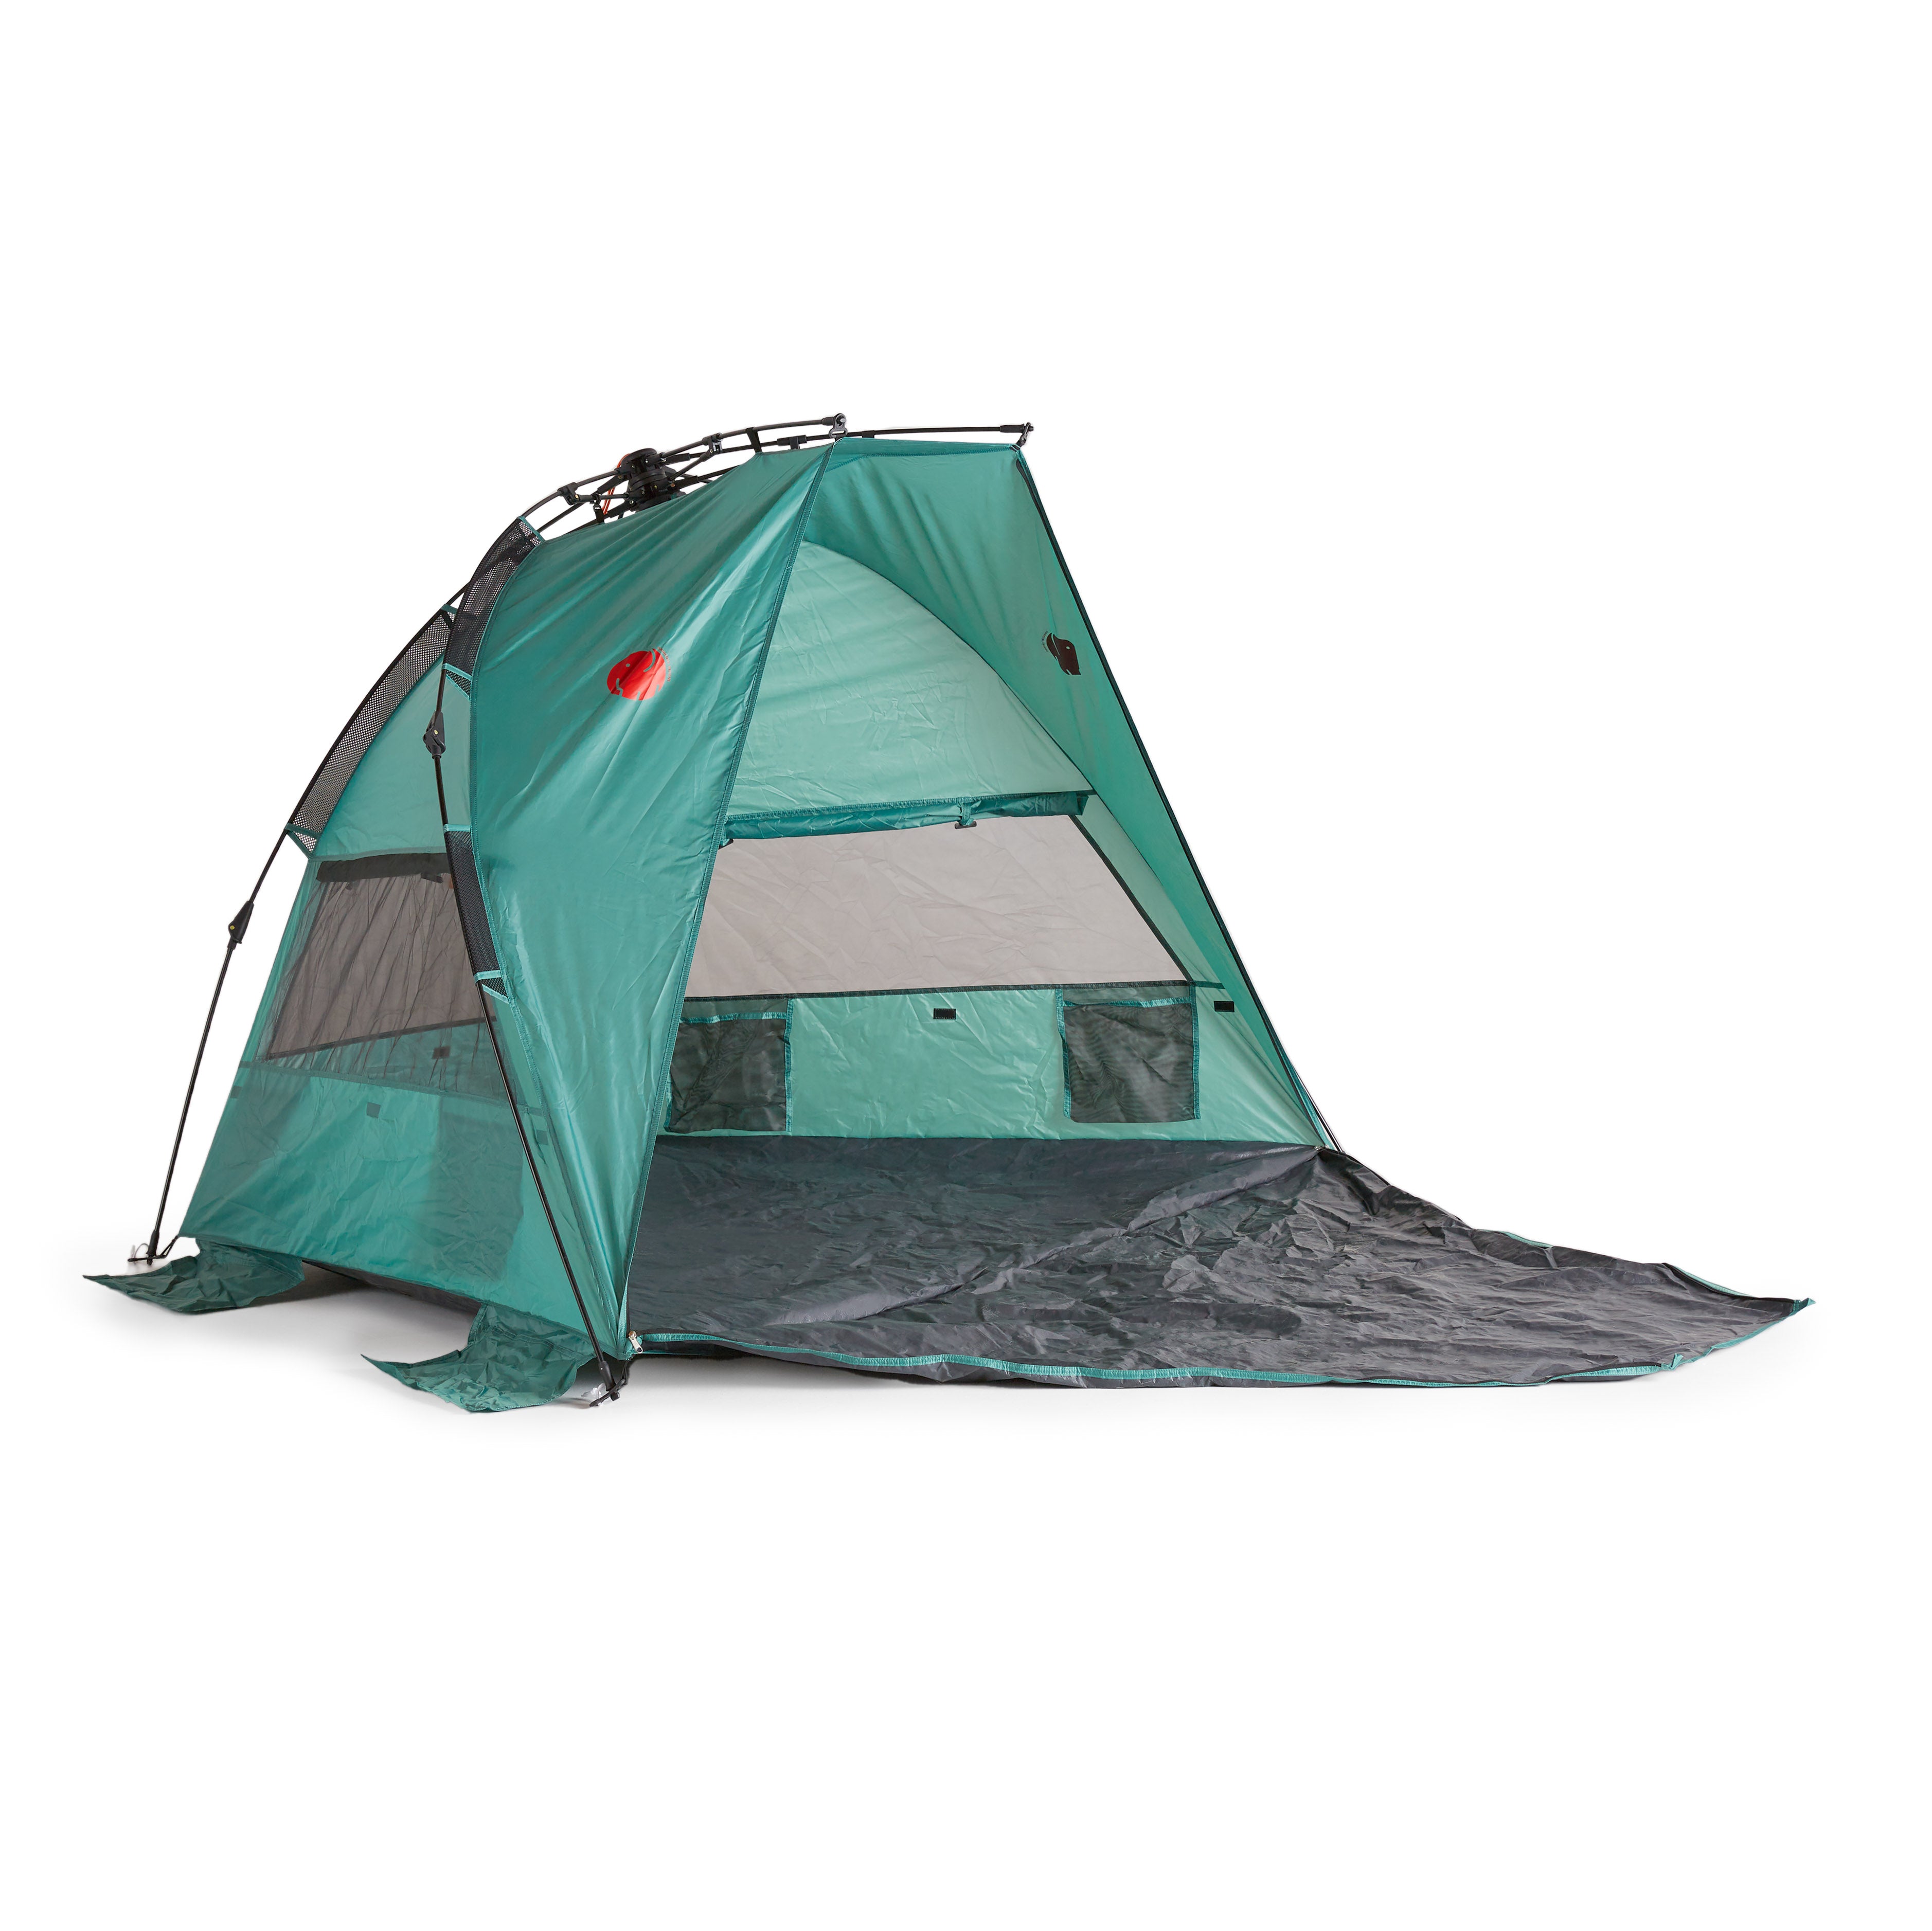 OMNICORE DESIGNS XL 4 Person Pop Up EASY SET UP BEACH Green – OmniCoreDesigns